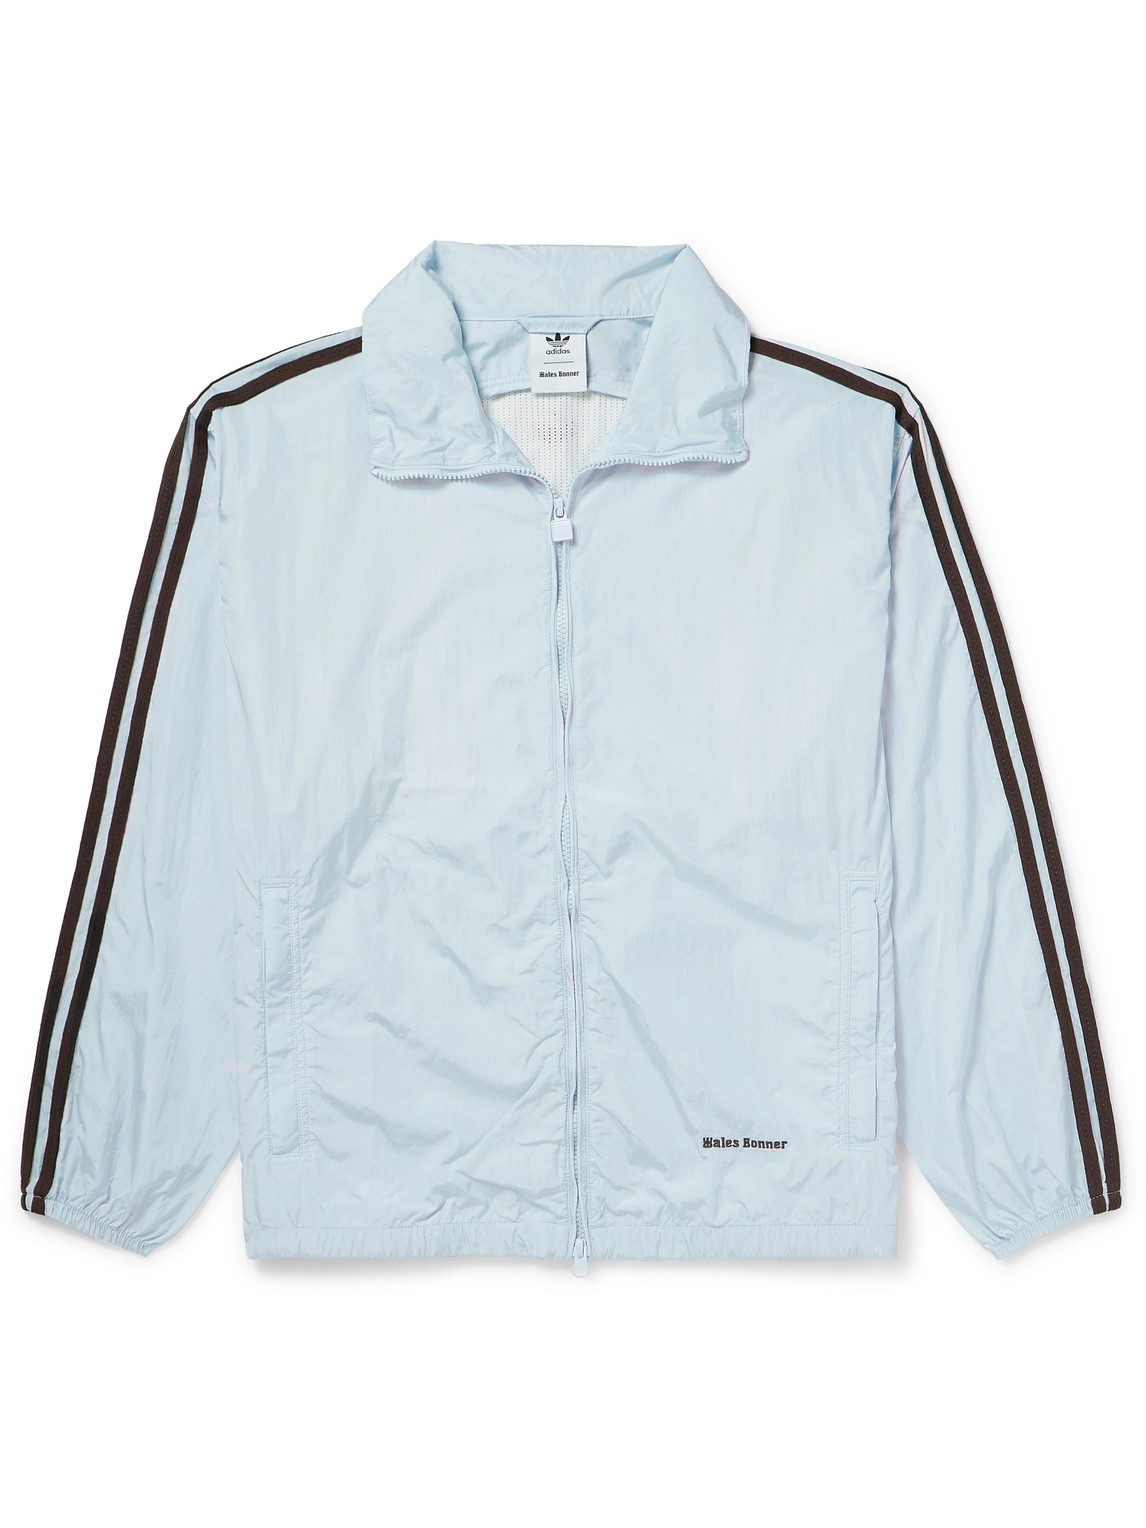 ADIDAS ORIGINALS WALES BONNER STRIPED CROCHET-TRIMMED RECYCLED-SHELL TRACK JACKET